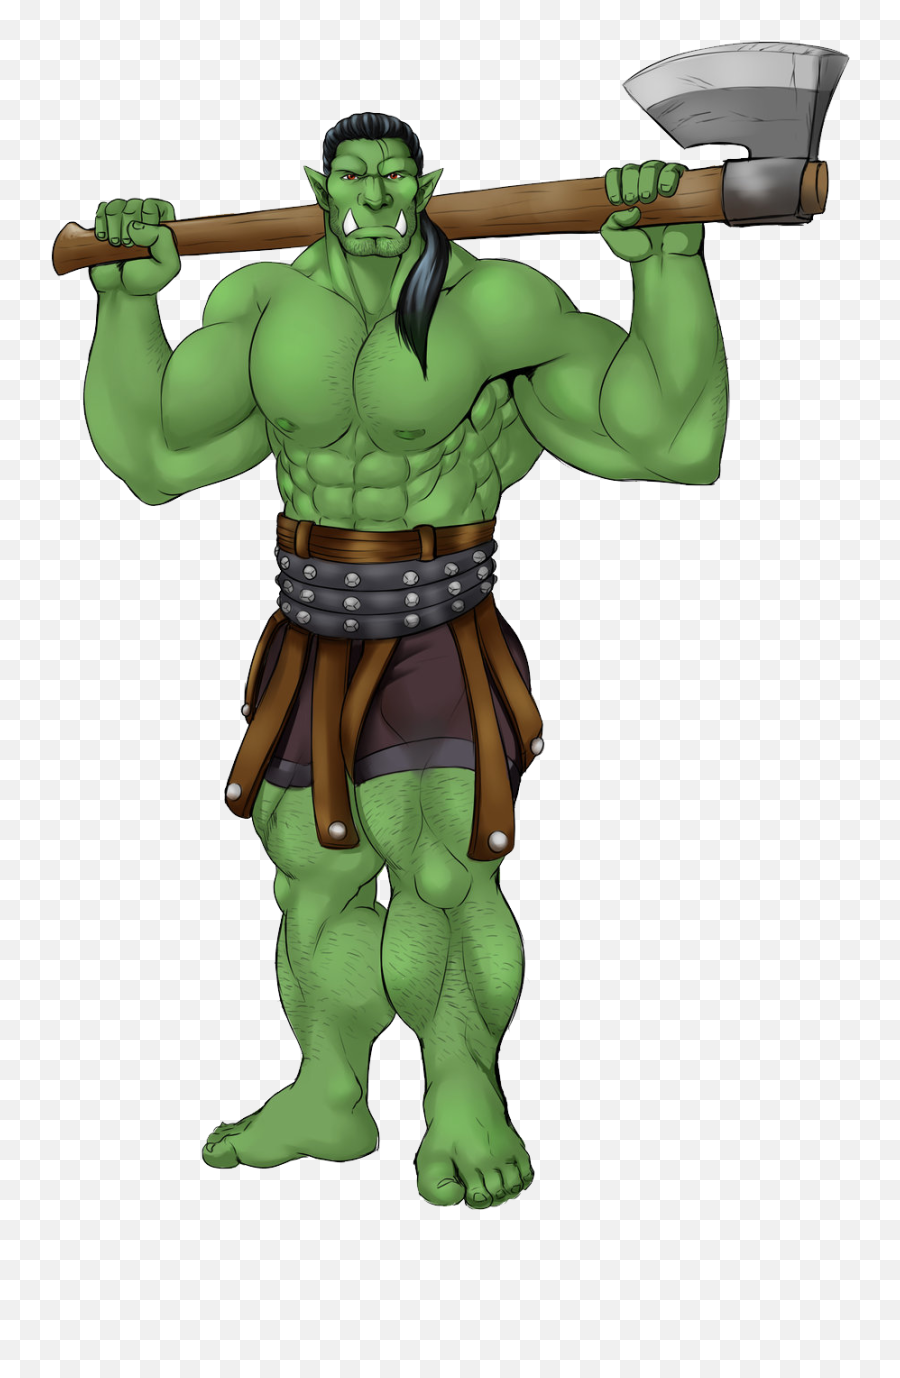 Download Orc Png Image For Free - Peon Orc Png,Orc Png